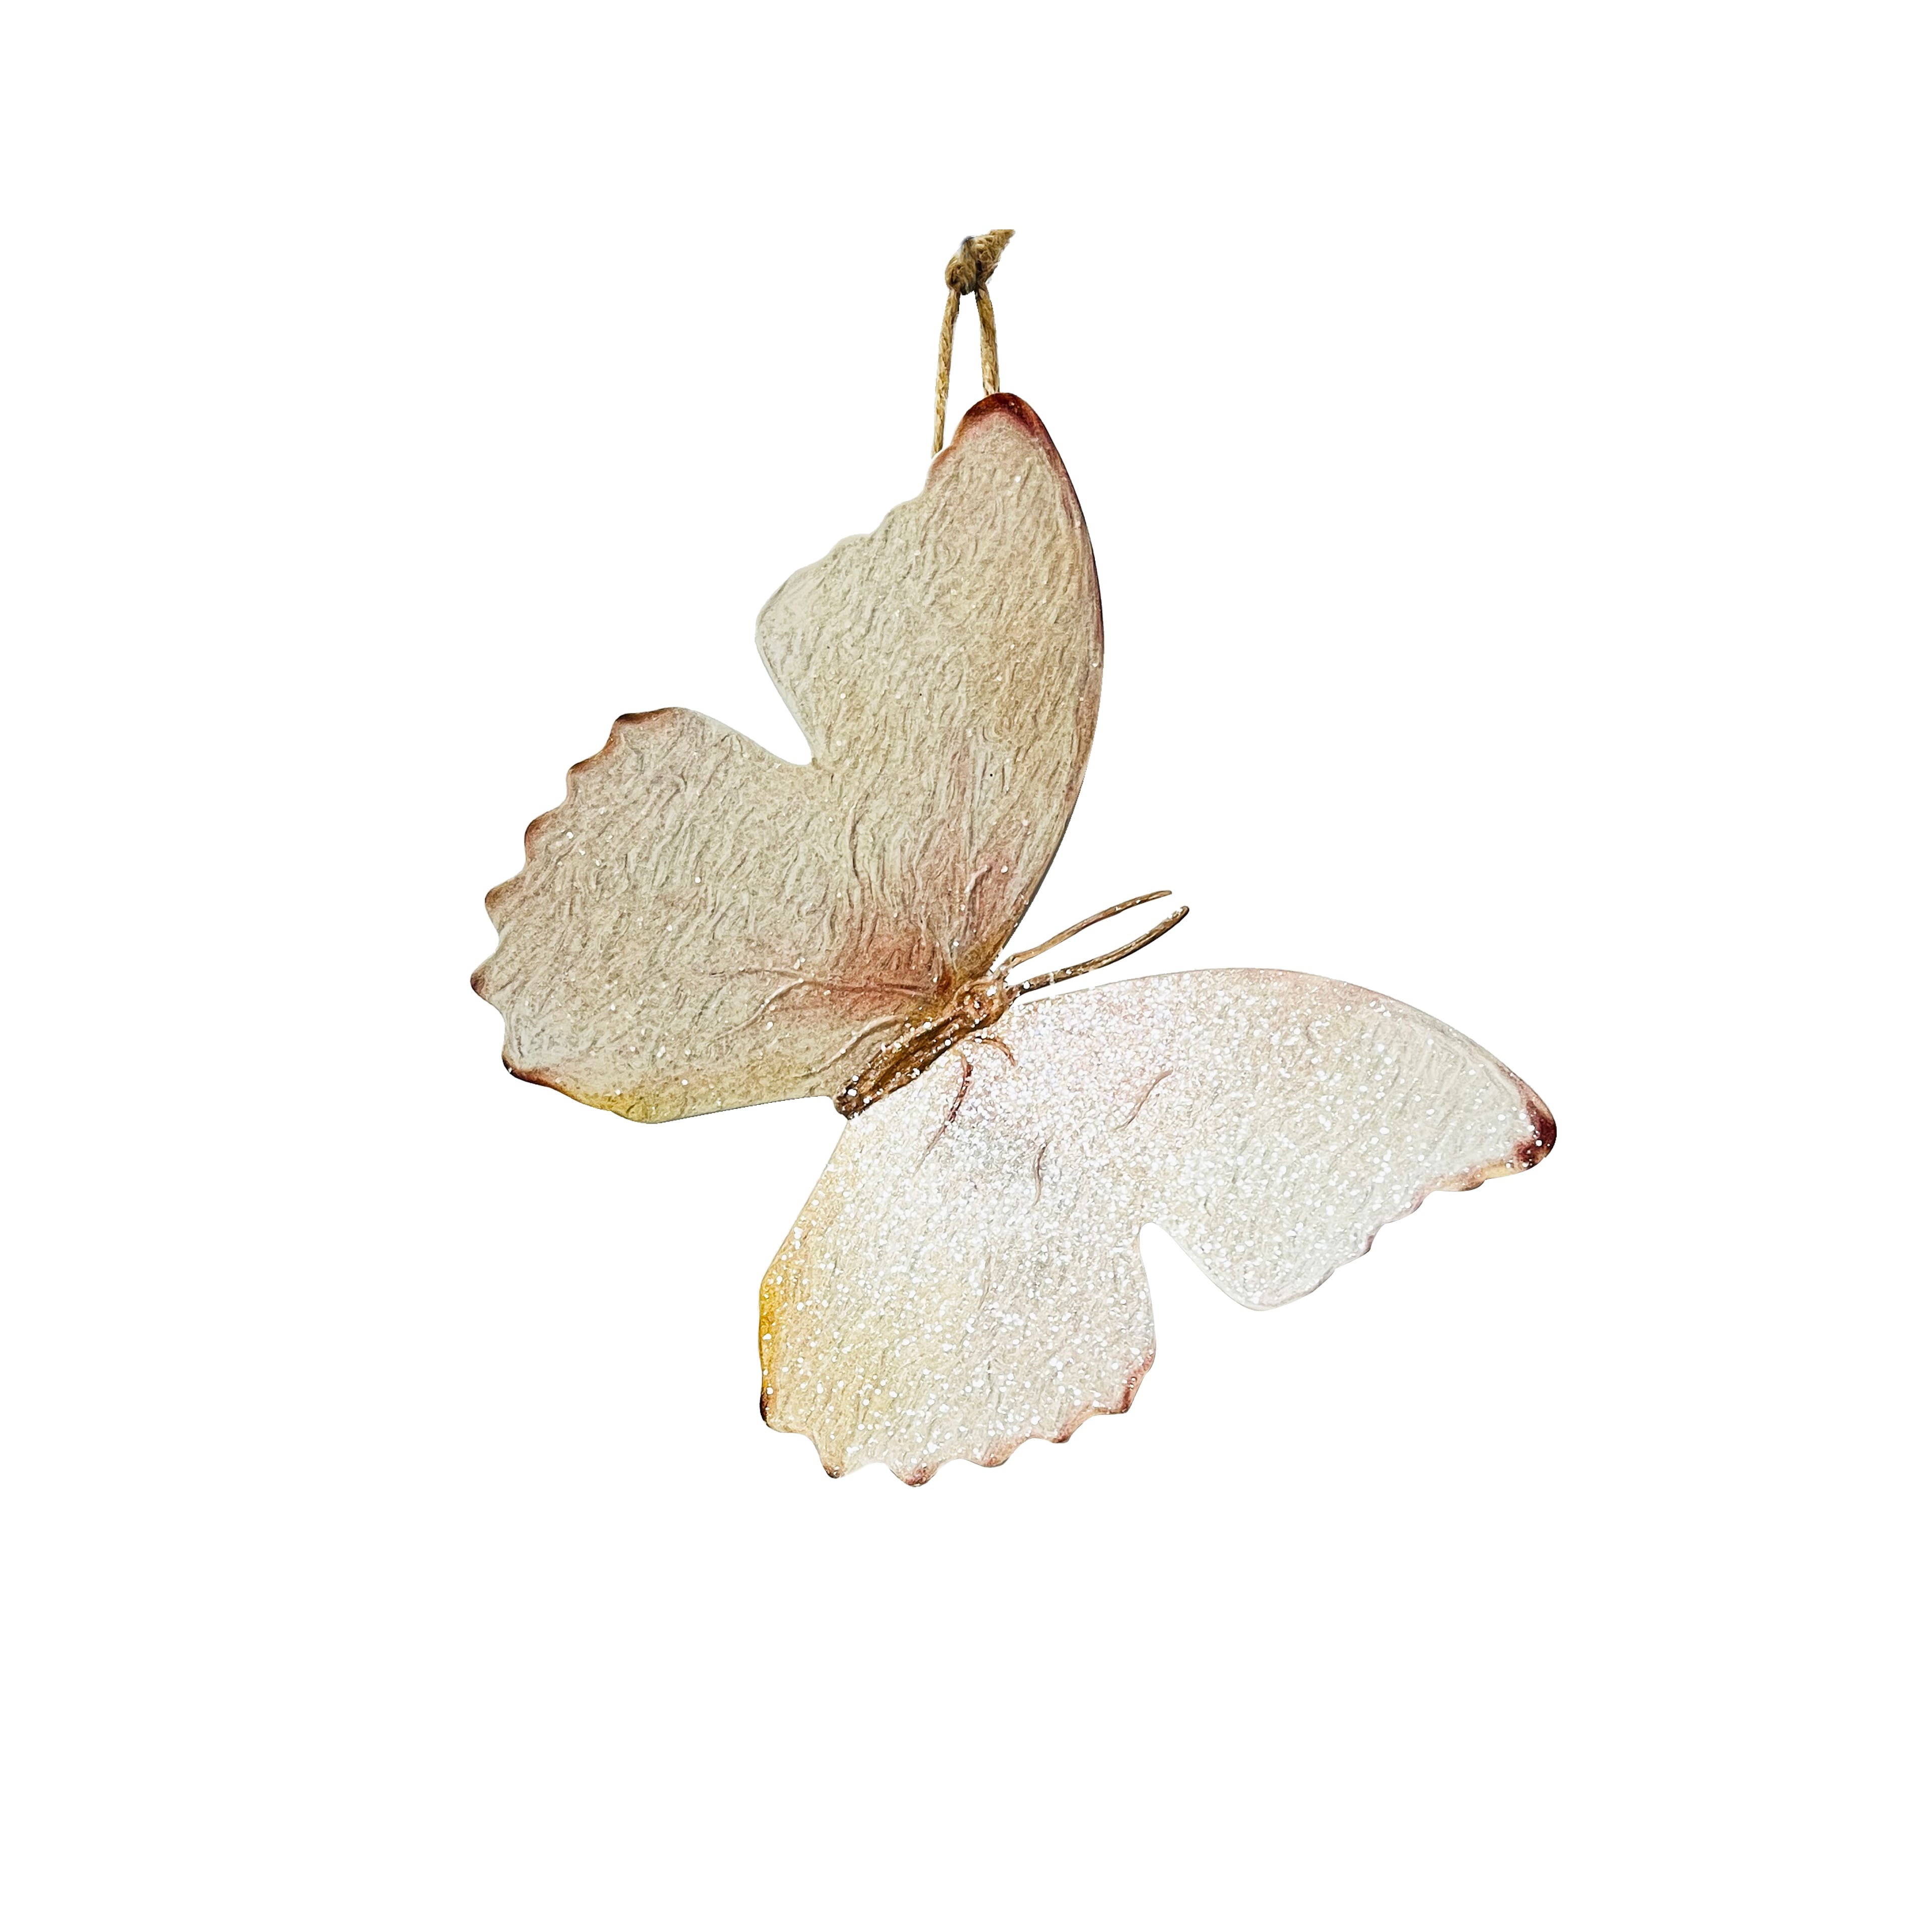 Assorted Metal Butterfly Wall Hanging by Ashland®, 1pc.